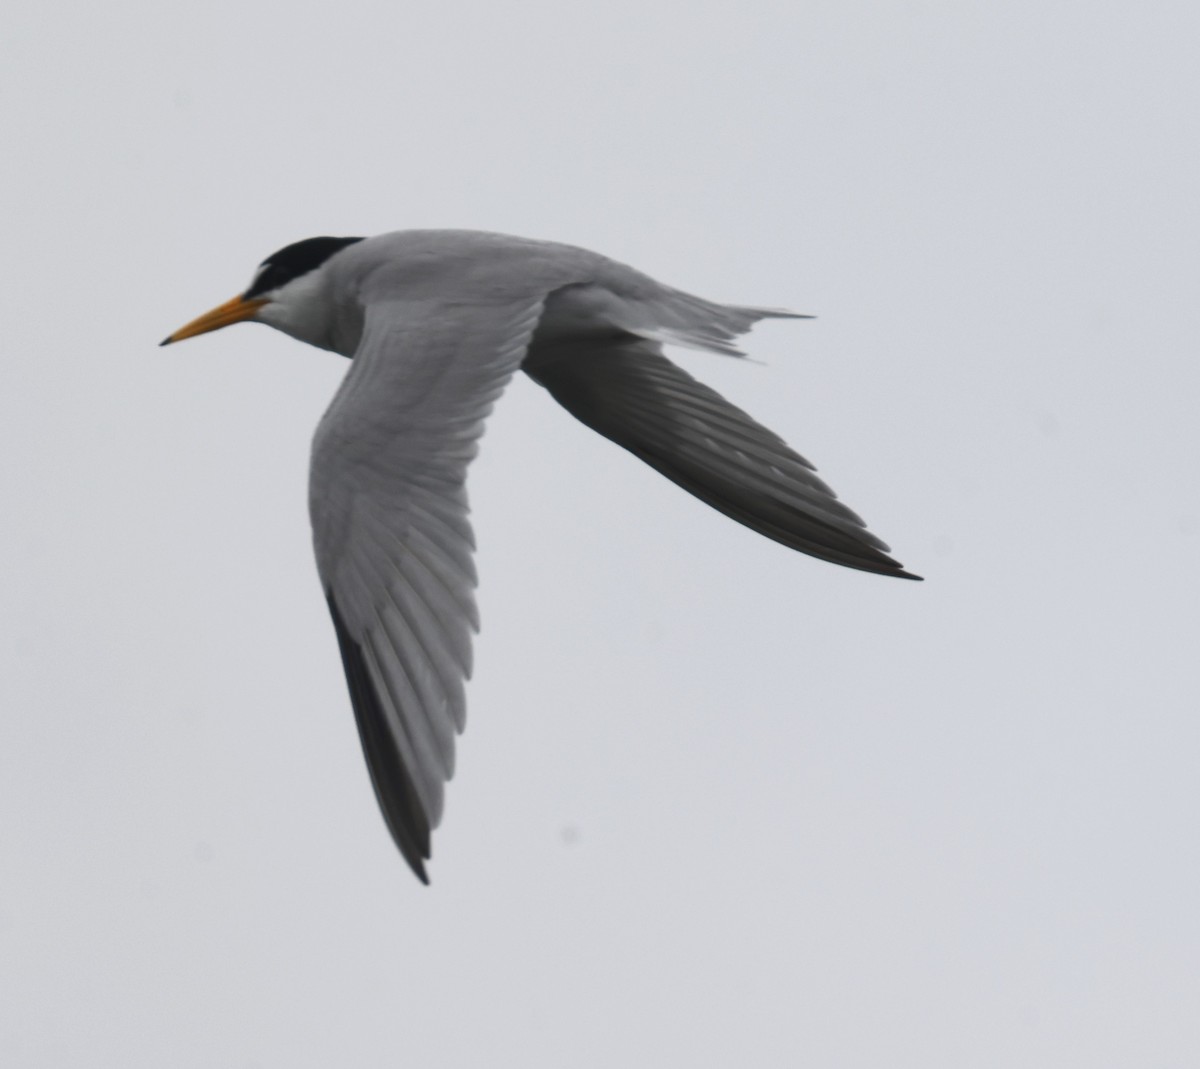 Least Tern - Fort McHenry Wetlands Data